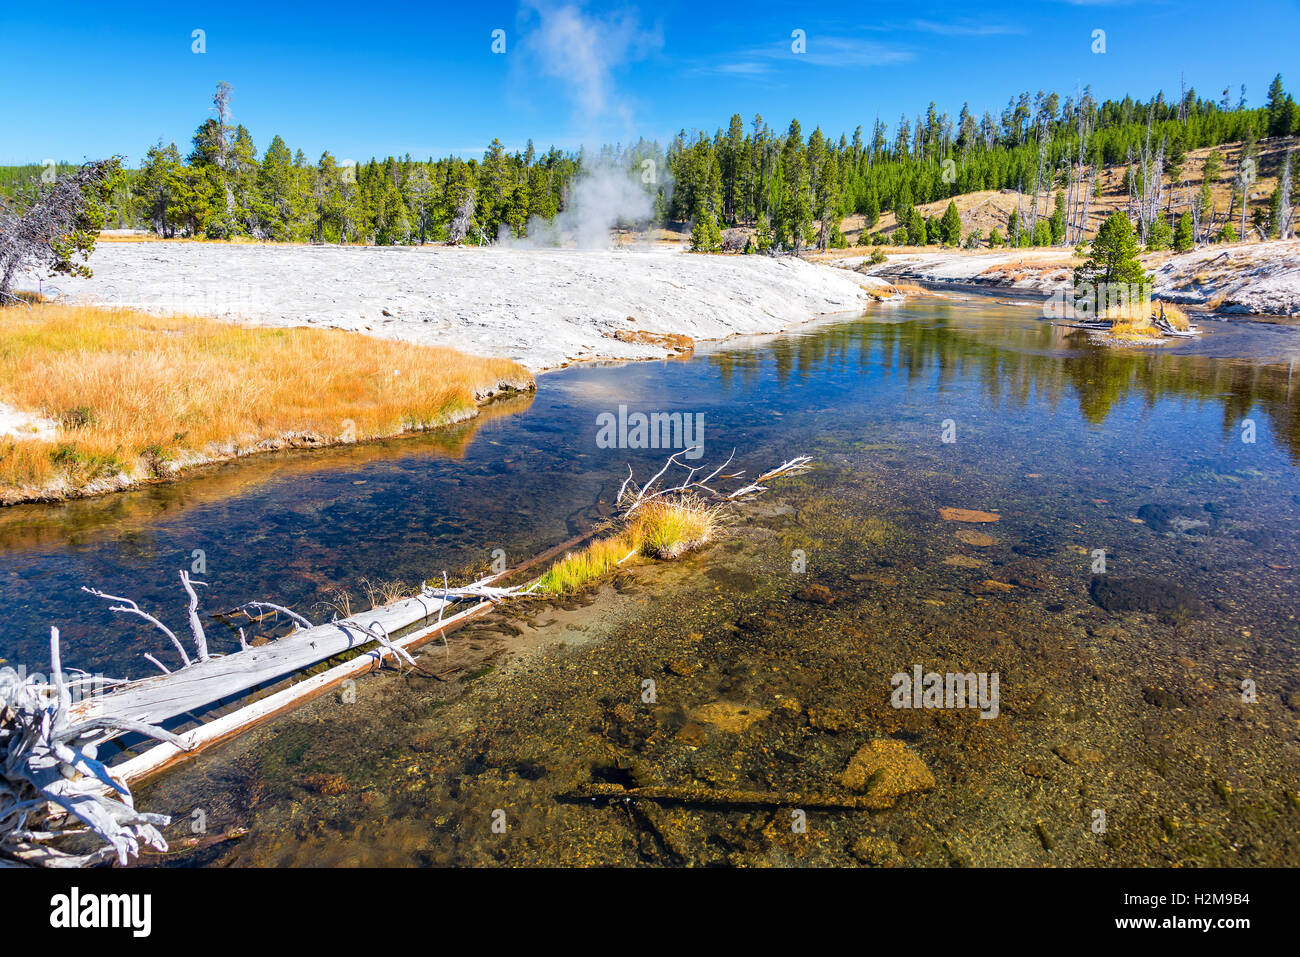 Firehole River with a steaming geyser in the background in Yellowstone National Park Stock Photo